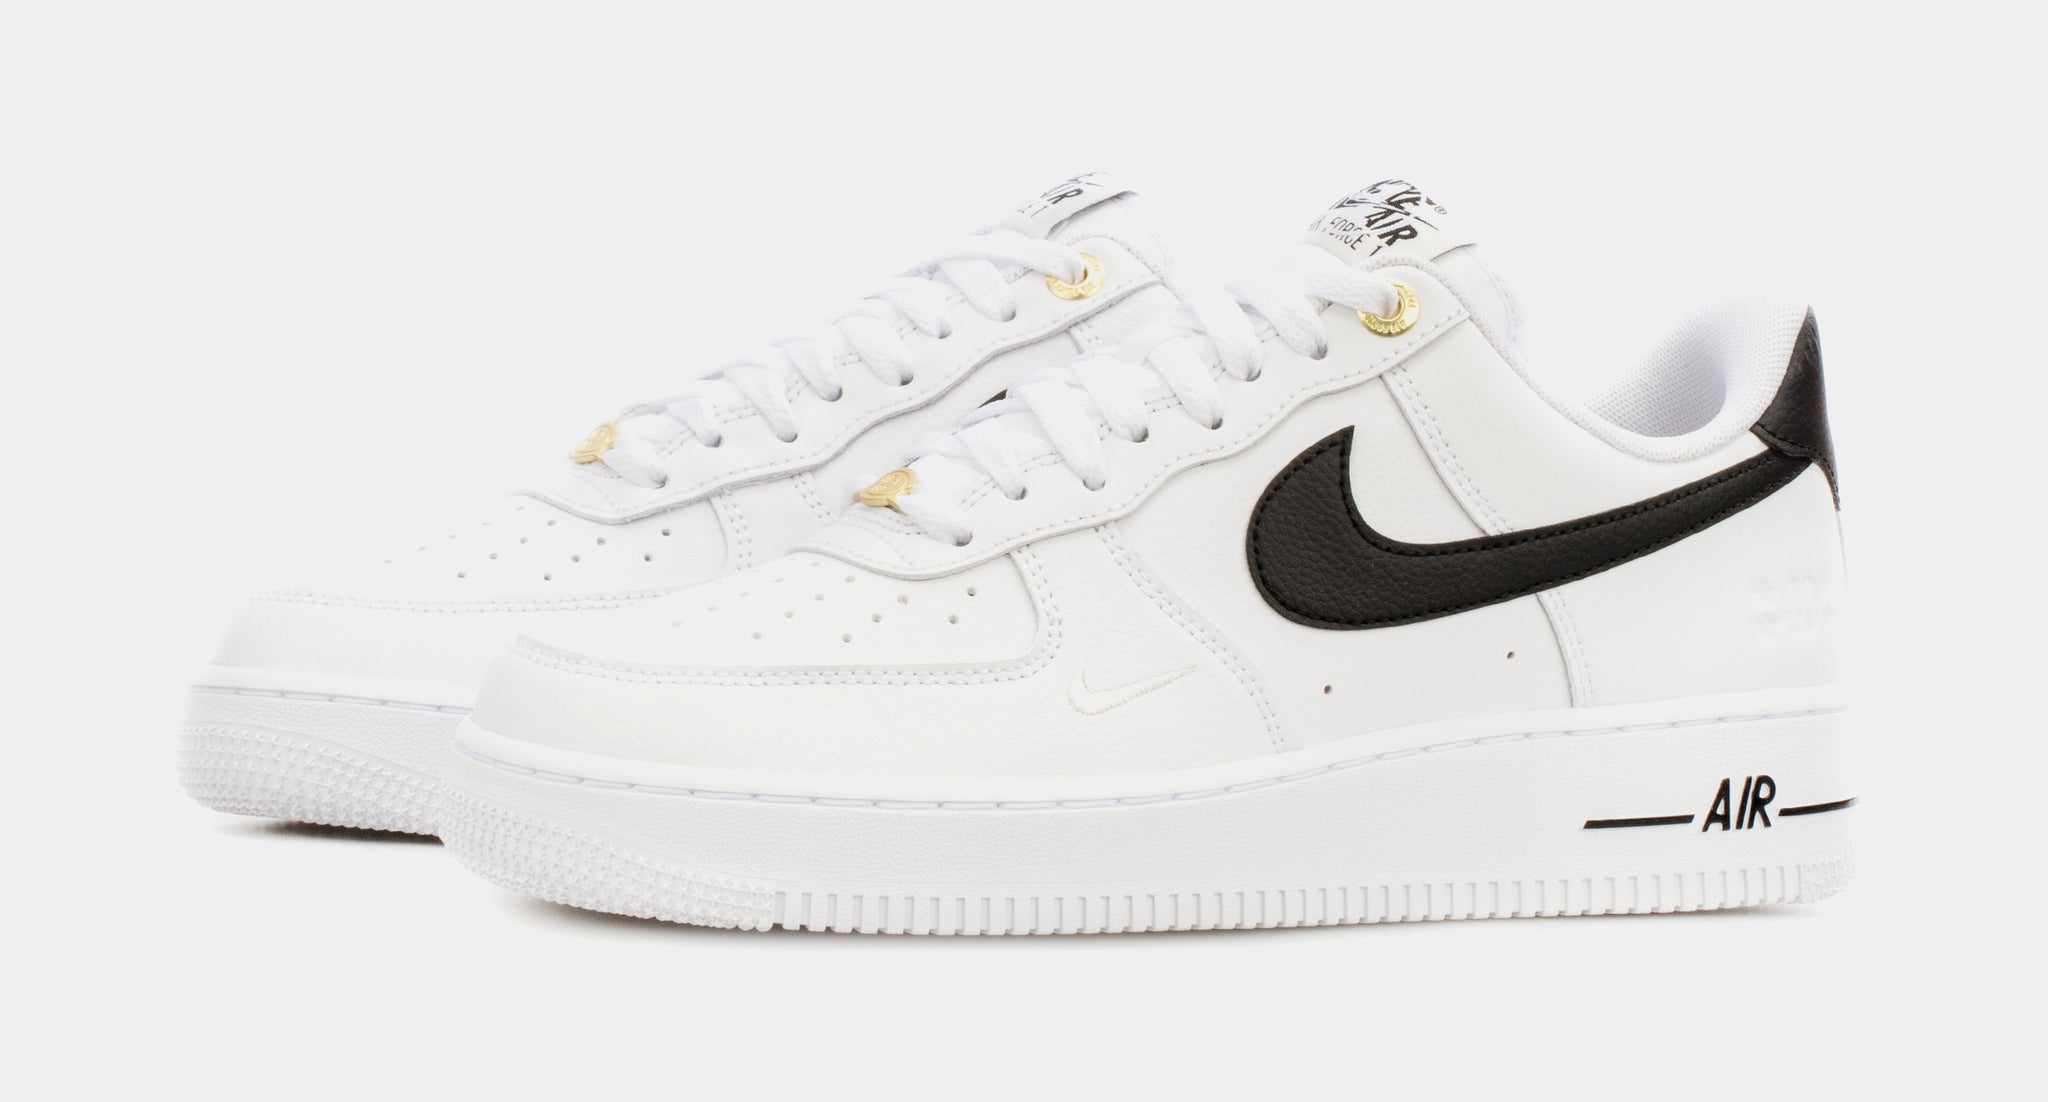 Sole for souls Nike Air Force 1'07 Worldwide Men's (7.5-13) $140